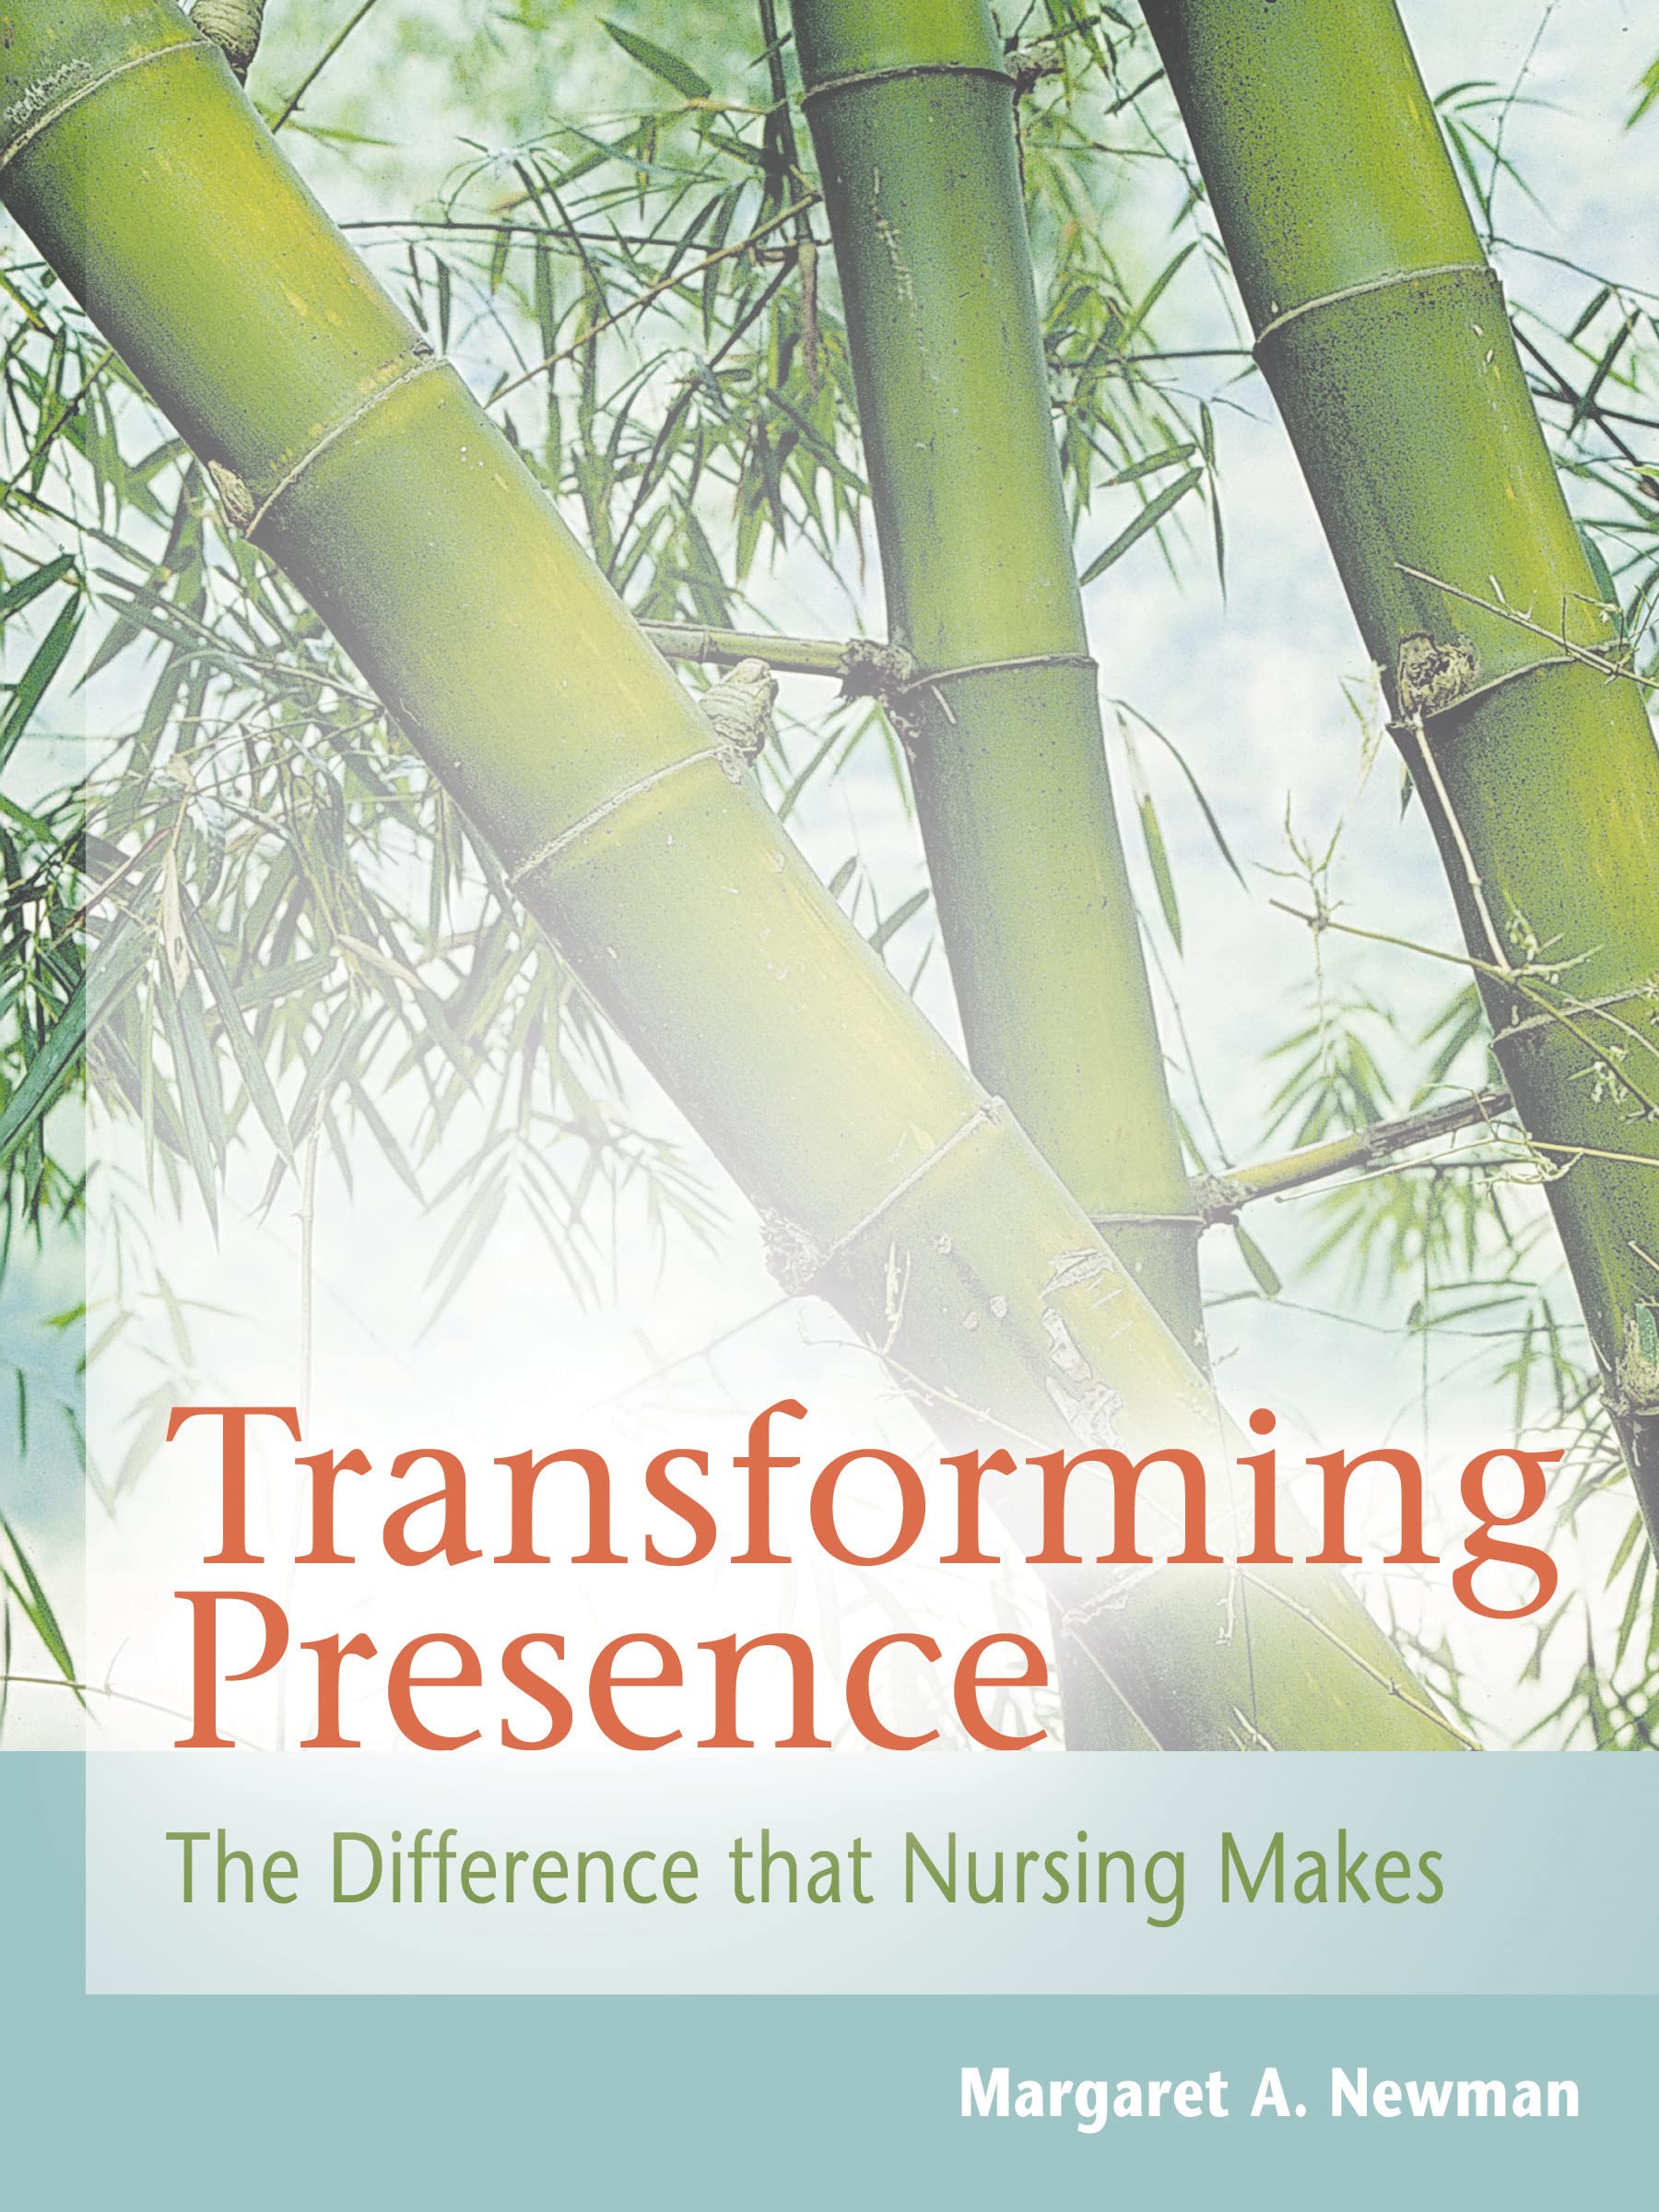 Transforming Presence: The Difference that Nursing Makes